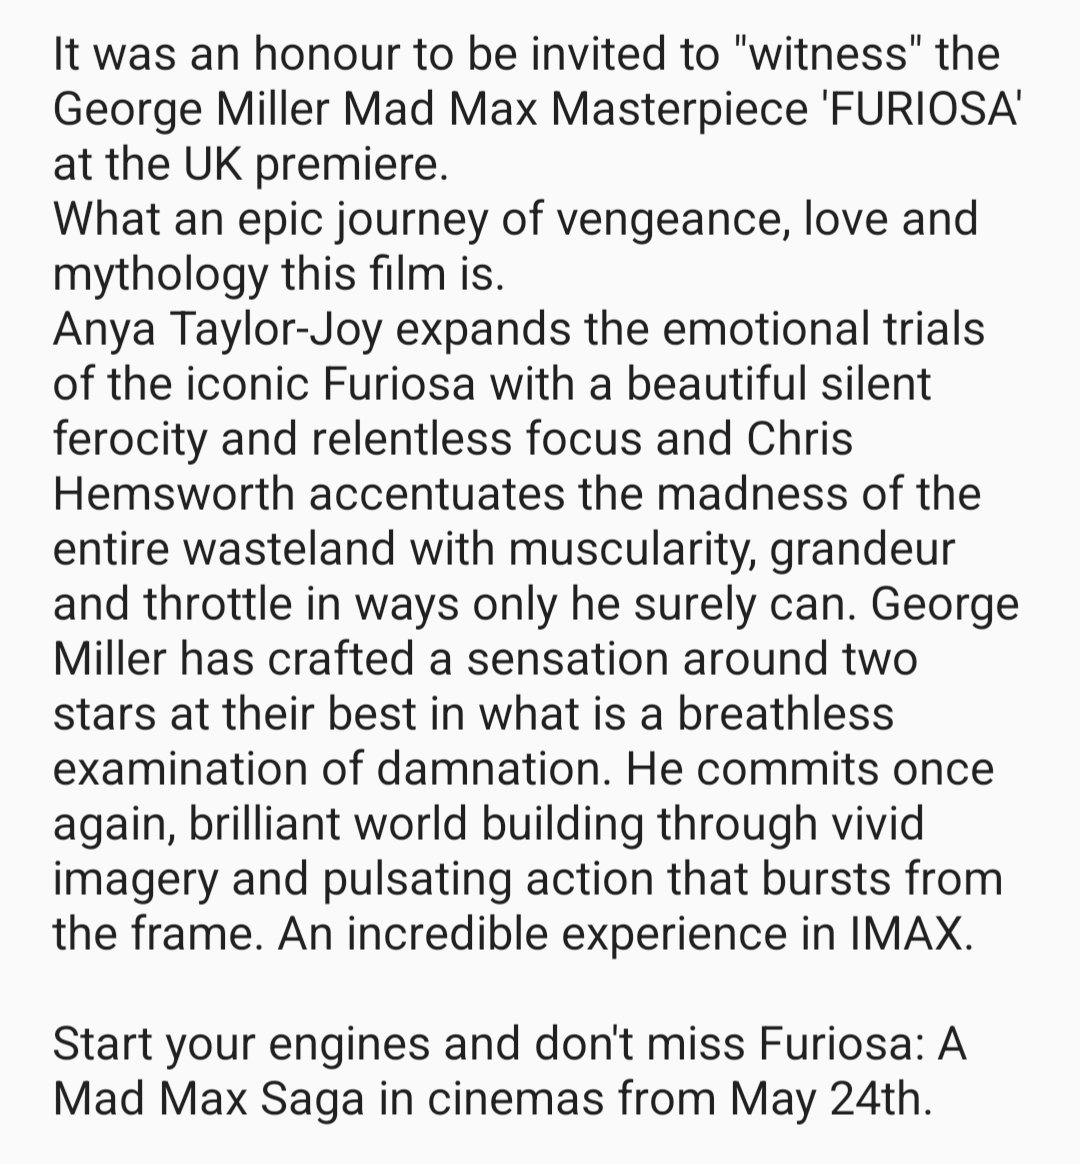 It was an honour to 'witness' the George Miller Masterpiece #FURIOSA at the UK premiere. Anya Taylor-Joy & Chris Hemsworth are amazing in a breathless examination of damnation. An incredible experience in IMAX. Don't miss Furiosa: A Mad Max Saga in cinemas 24th May #MadMaxFuriosa